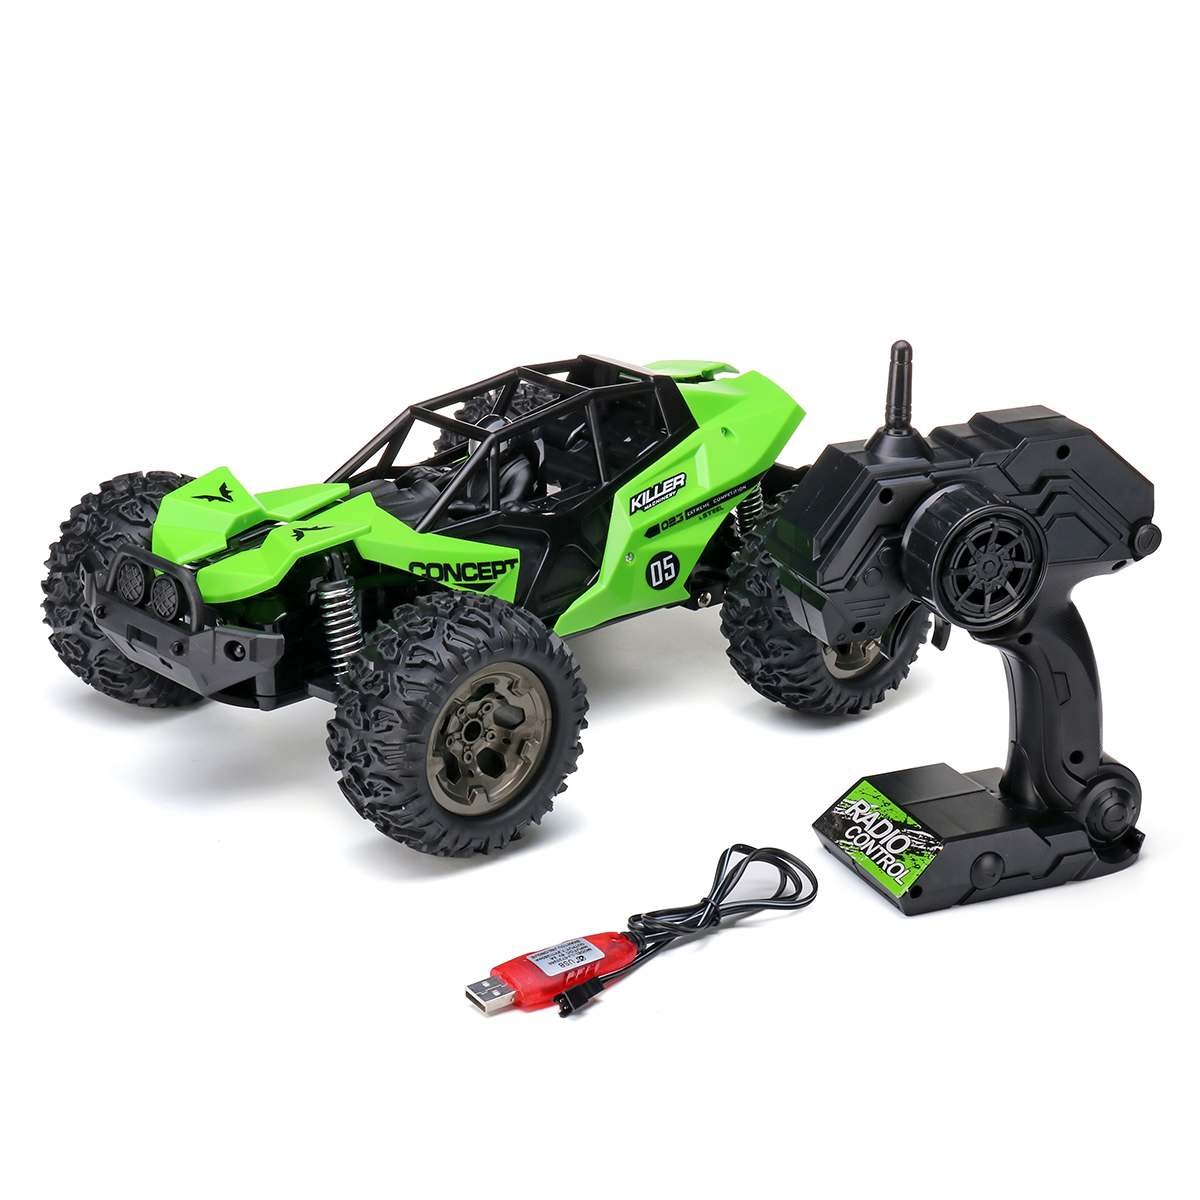 

NEW 1:12 RC Car Scale Remote Control Car 55+km/h High Speed Off Road Vehicle Toys RC Car for Kids and Adults